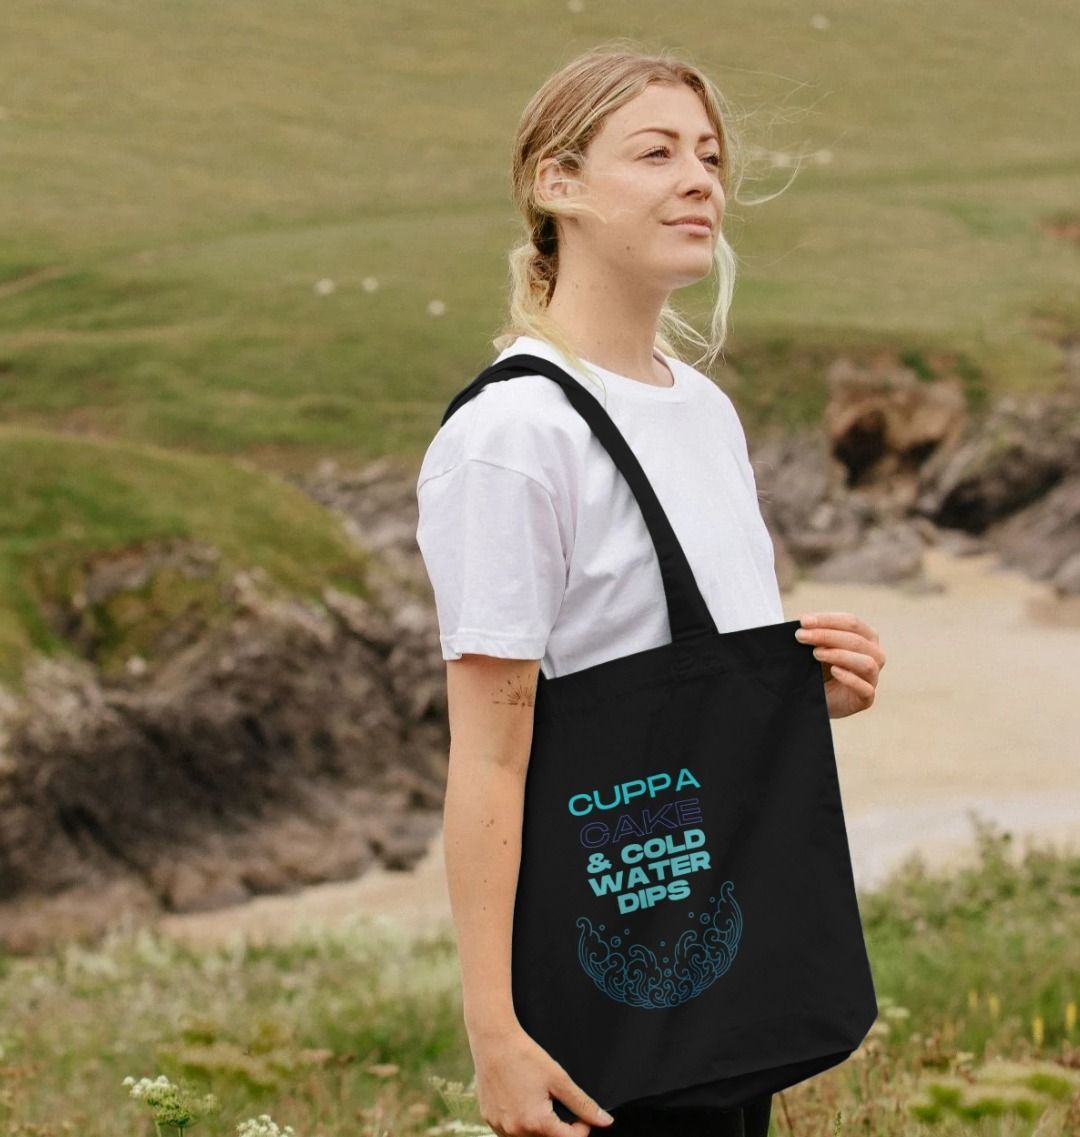 'CUPPA, CAKE & COLD WATER DIPS' Tote Bag